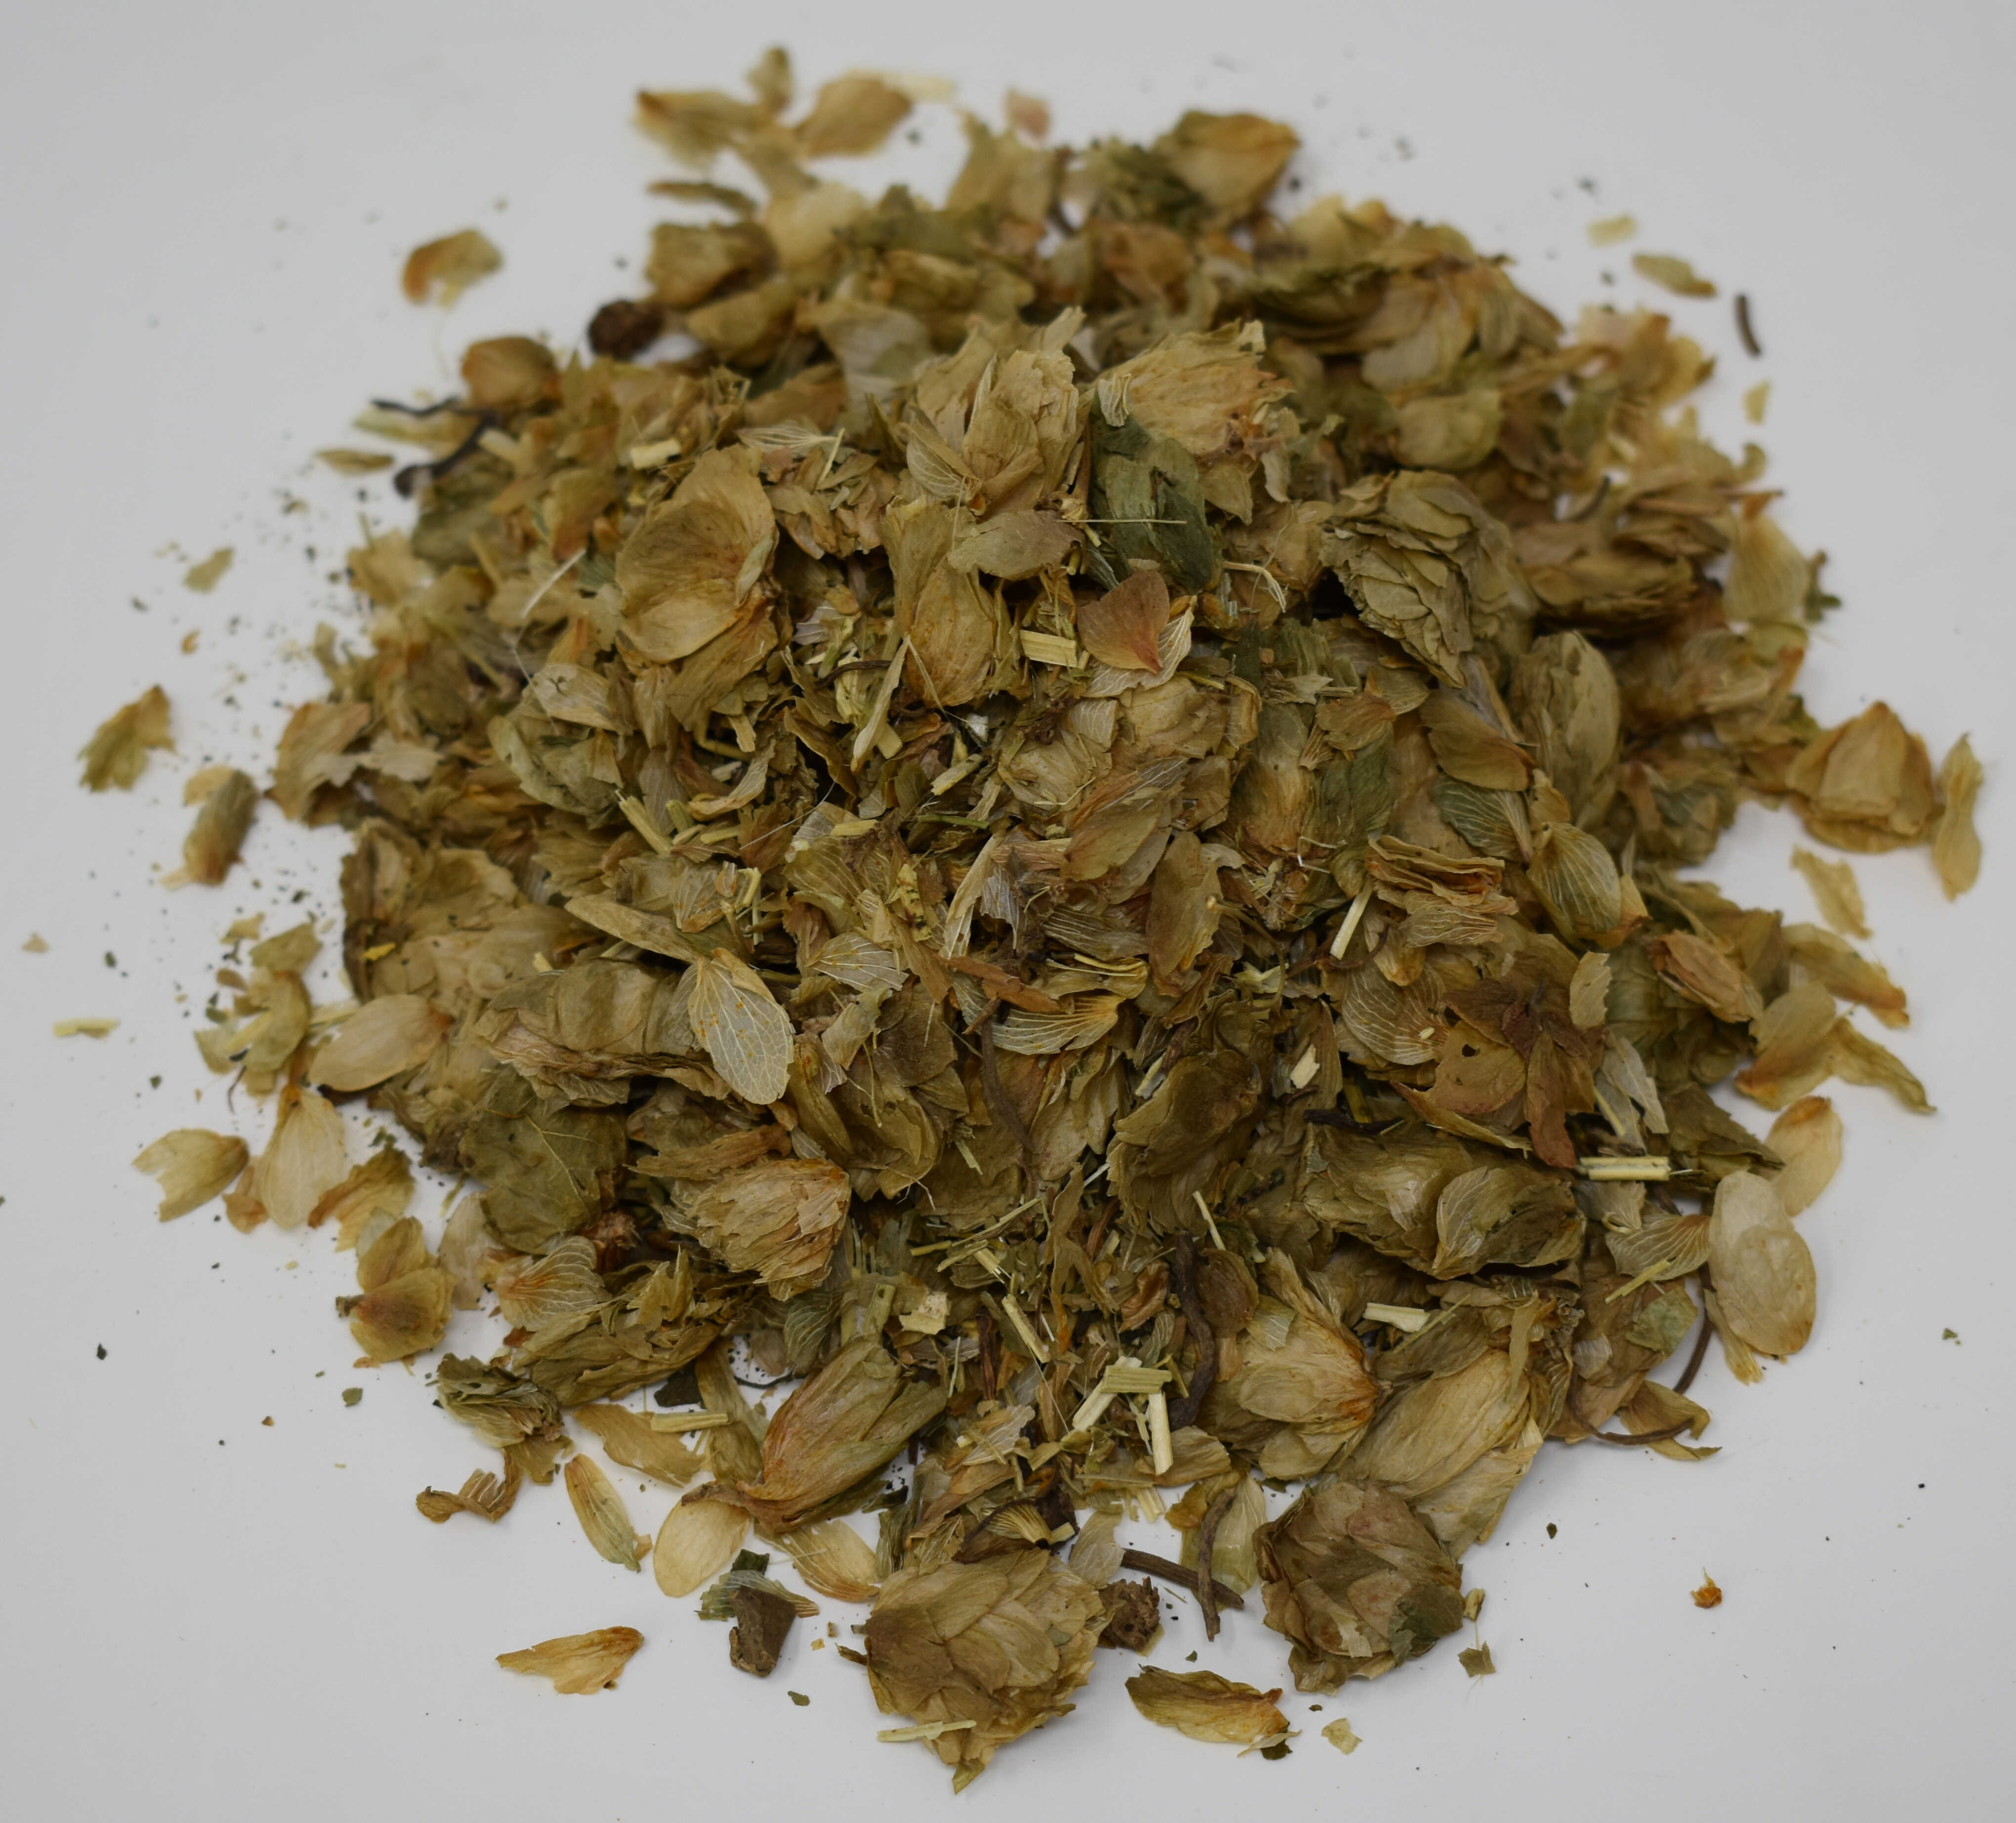 Valerian, Passion Flower and Hops - Top Photo